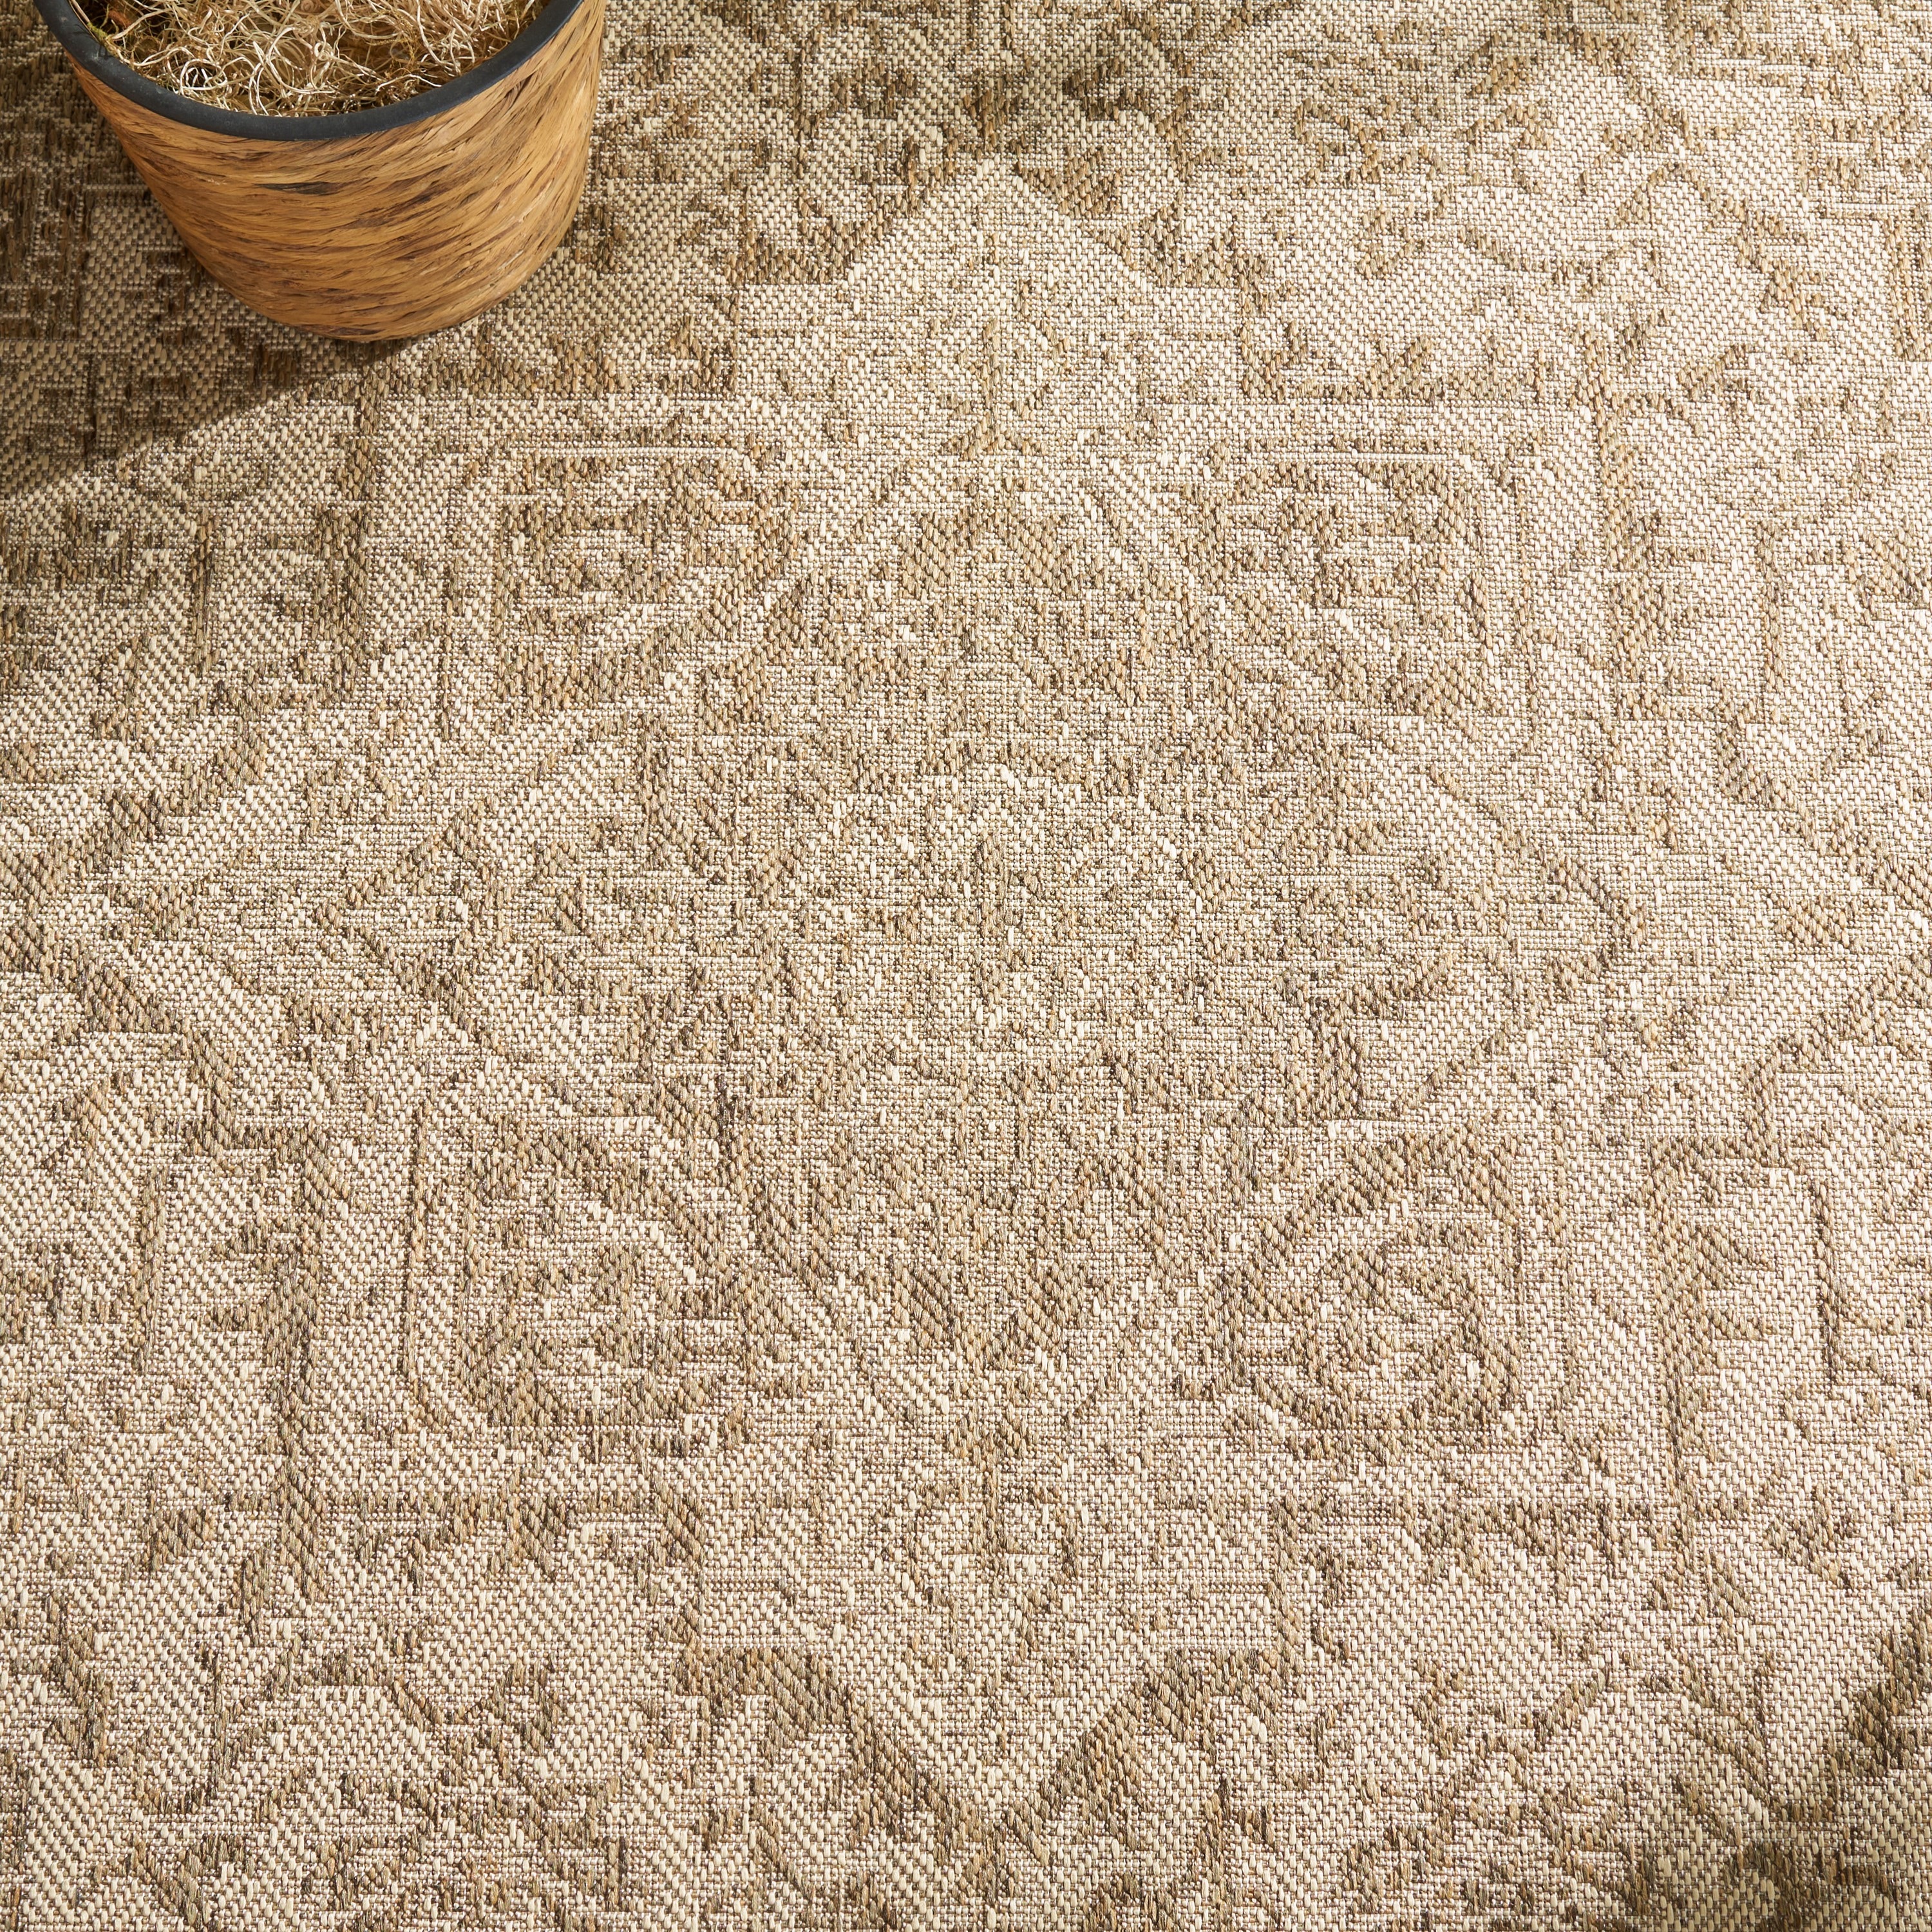 Safavieh Beach House Tressie 9 X 12 (ft) Cream/Beige Indoor/Outdoor  Floral/Botanical Bohemian/Eclectic Area Rug in the Rugs department at